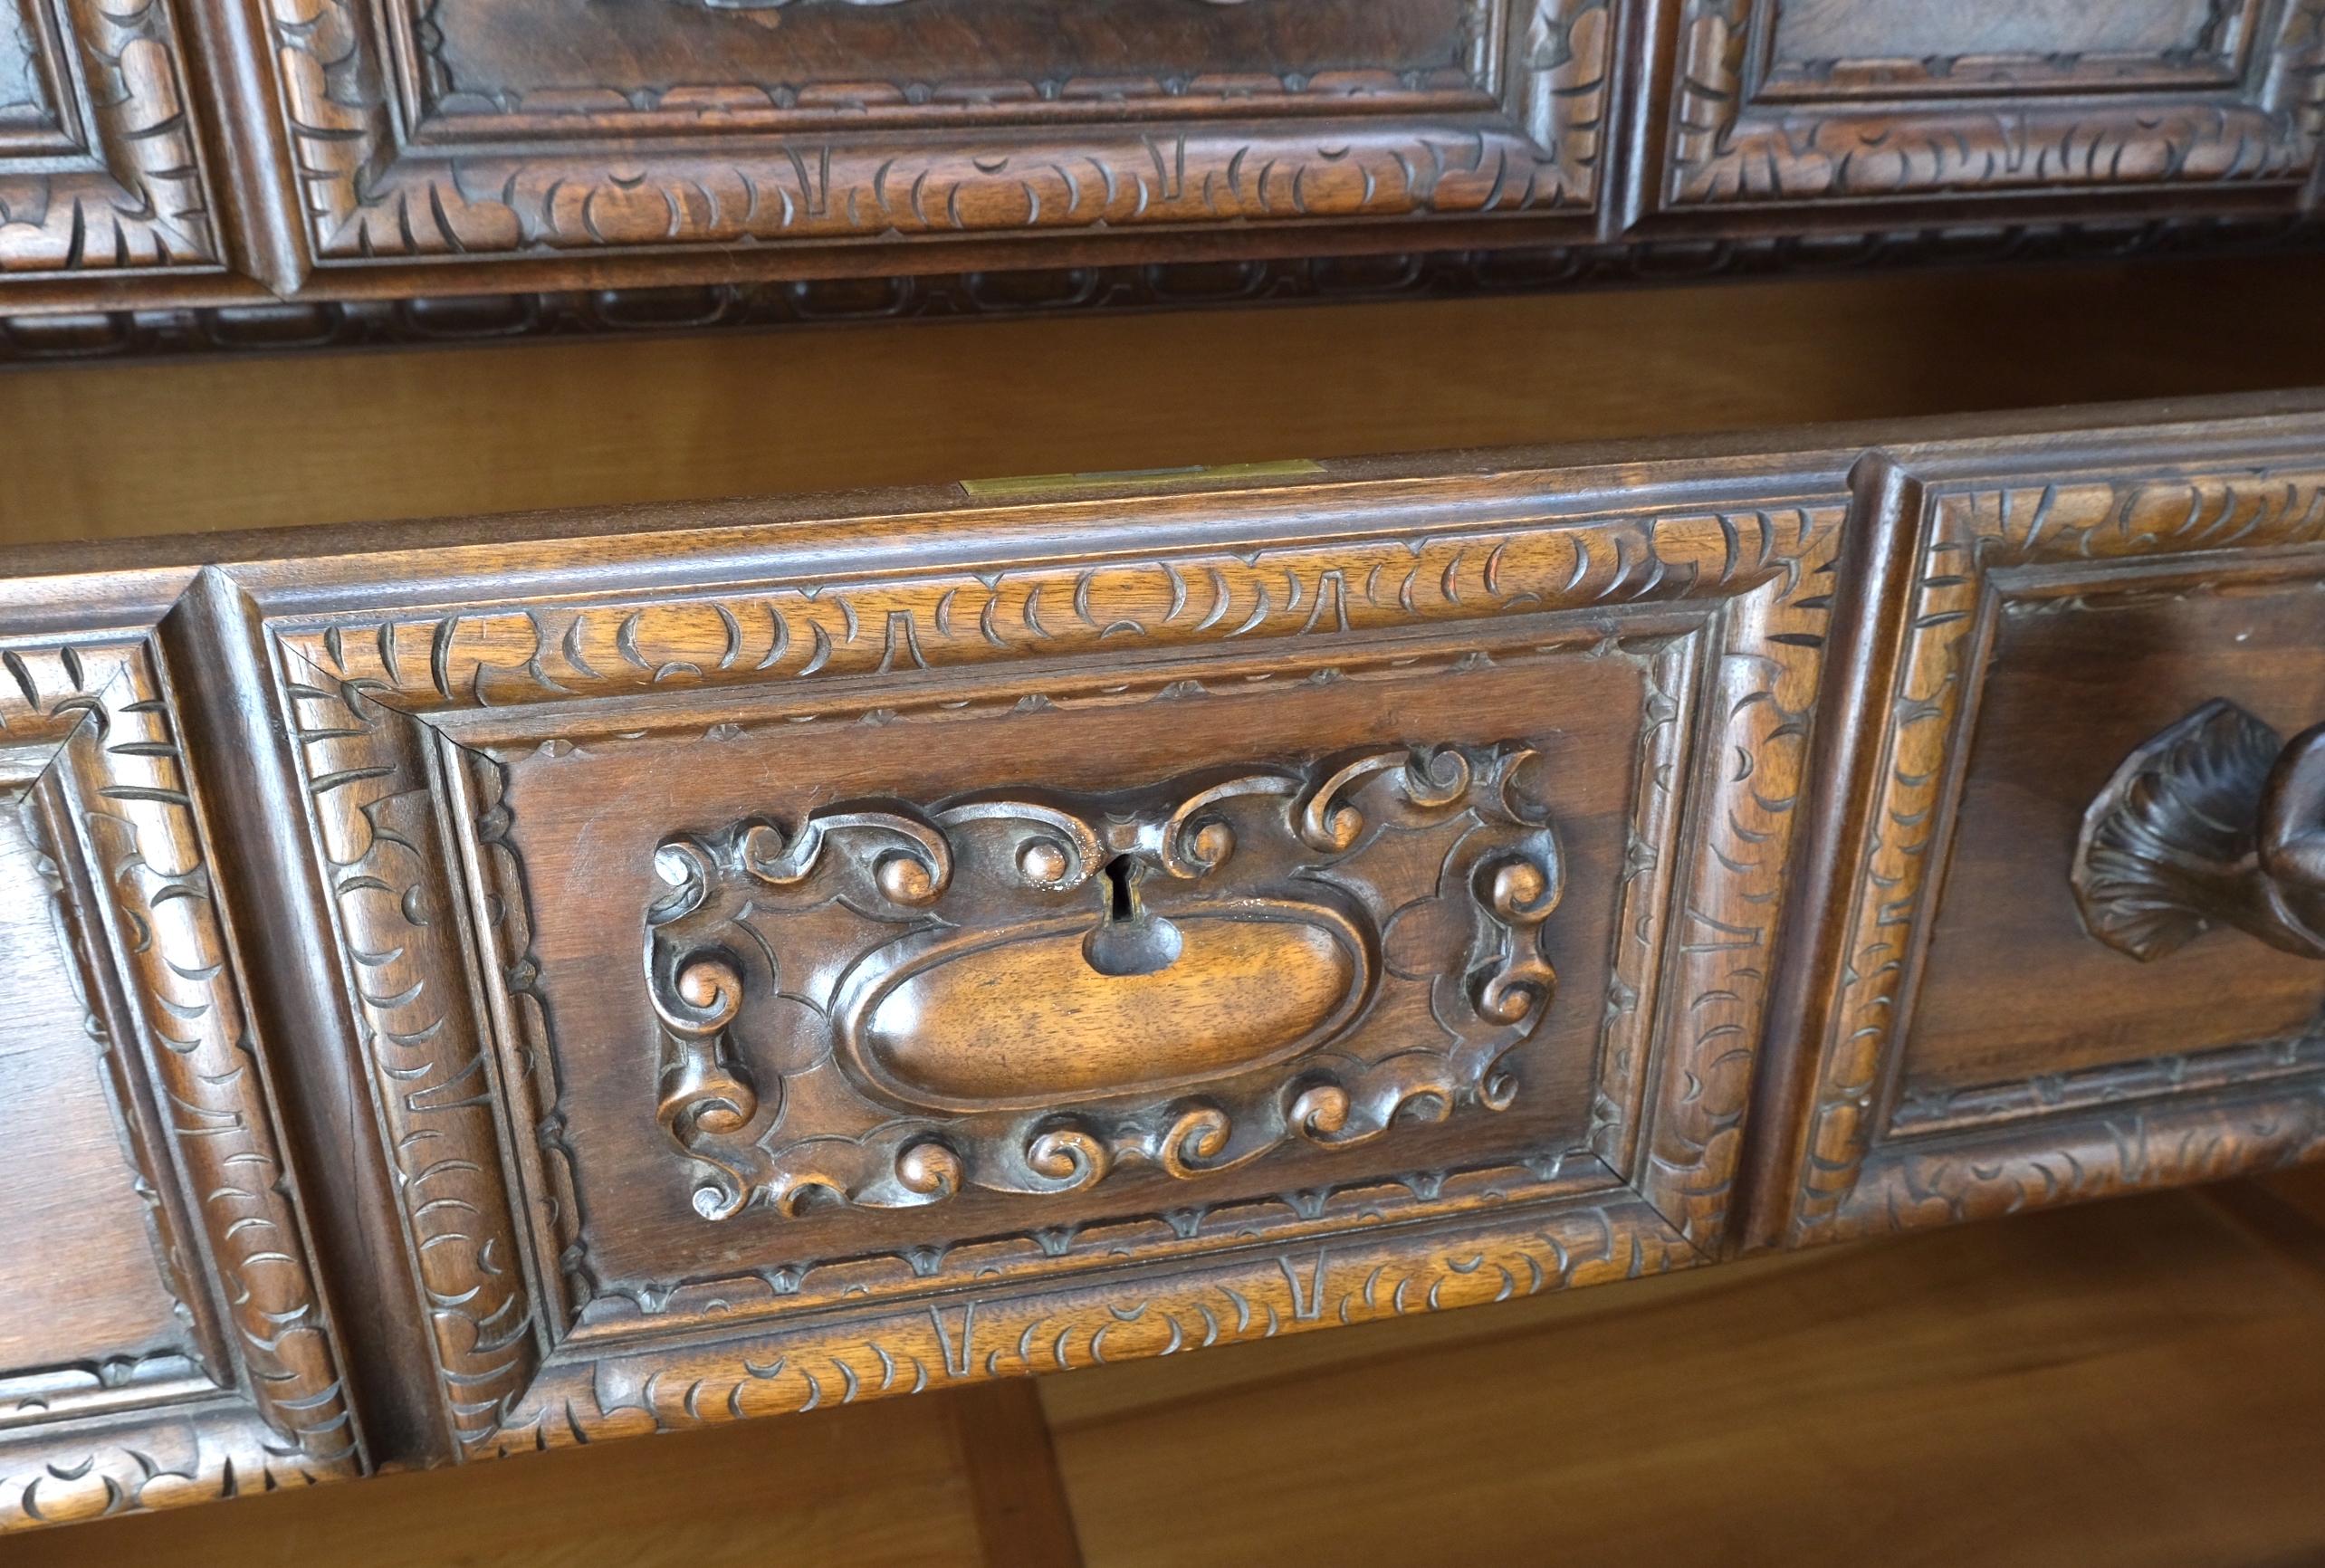 3 Dovetail Drawers Heavily Carved Wooden Pulls Rope Edge Bachelor Chest Dresser In Excellent Condition For Sale In Rockaway, NJ